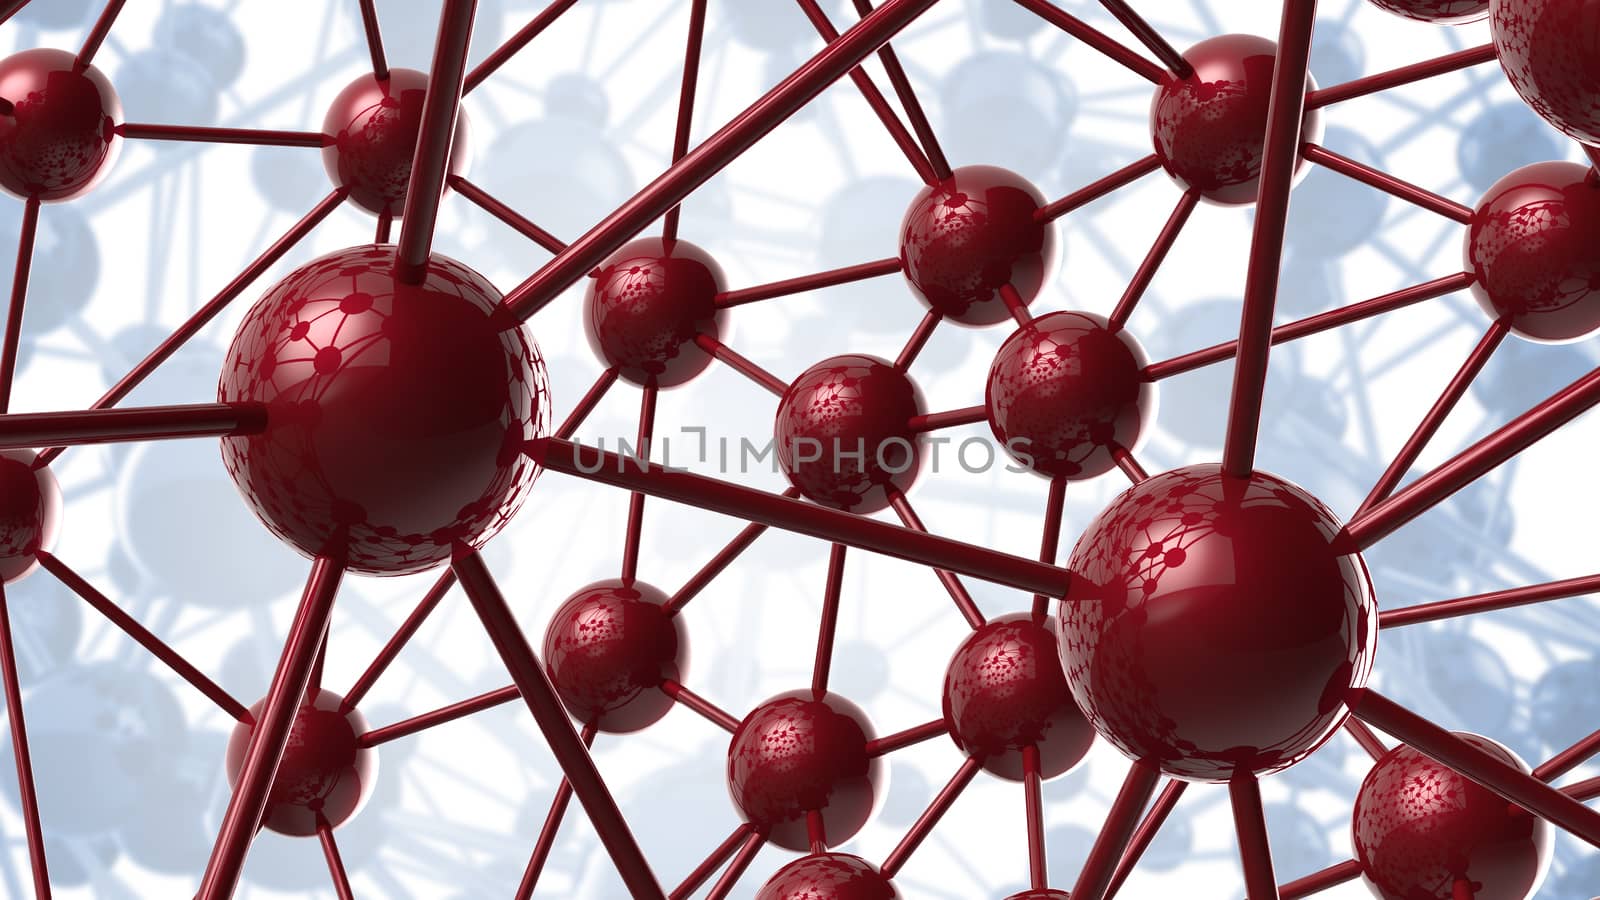 blue and red Molecular geometric chaos abstract structure. Science technology network connection hi-tech background 3d rendering illustration.